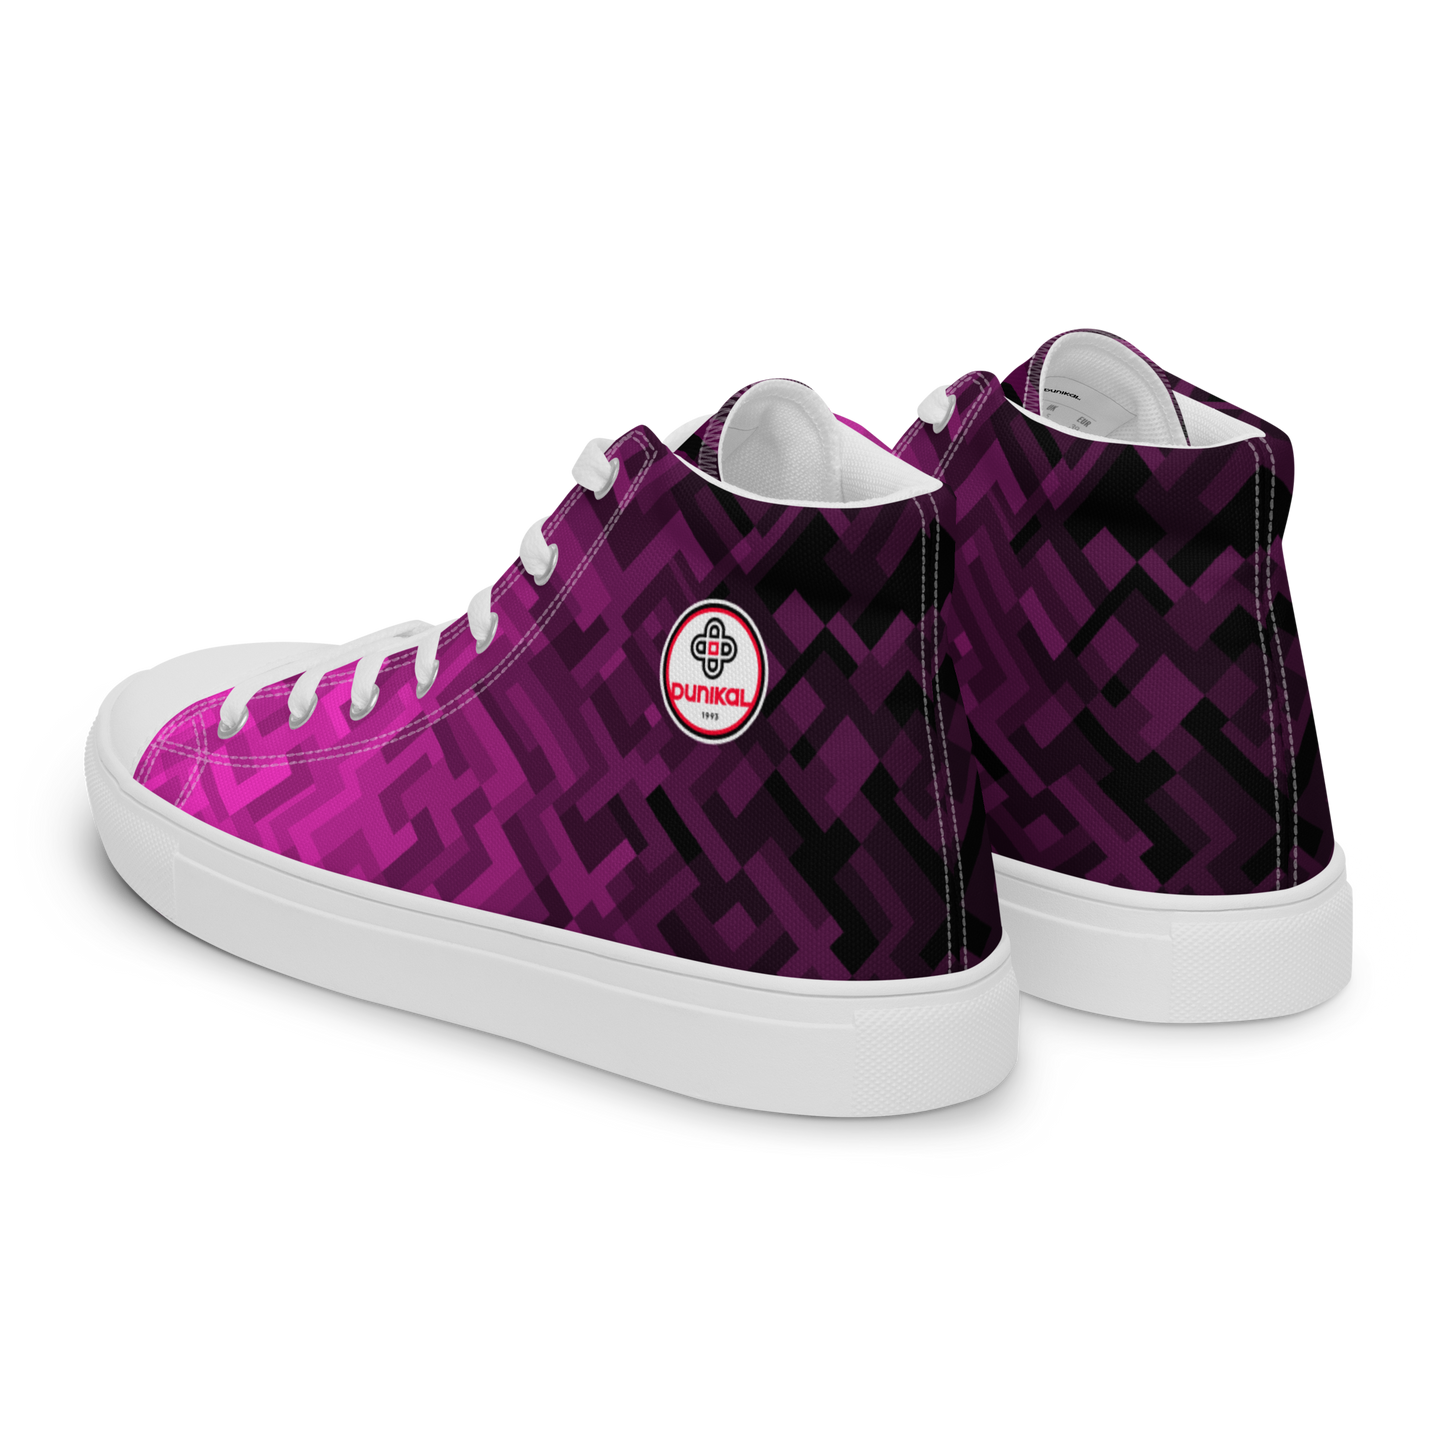 Women's Canvas Sneakers ❯ Polygonal Gradient ❯ Hollywood